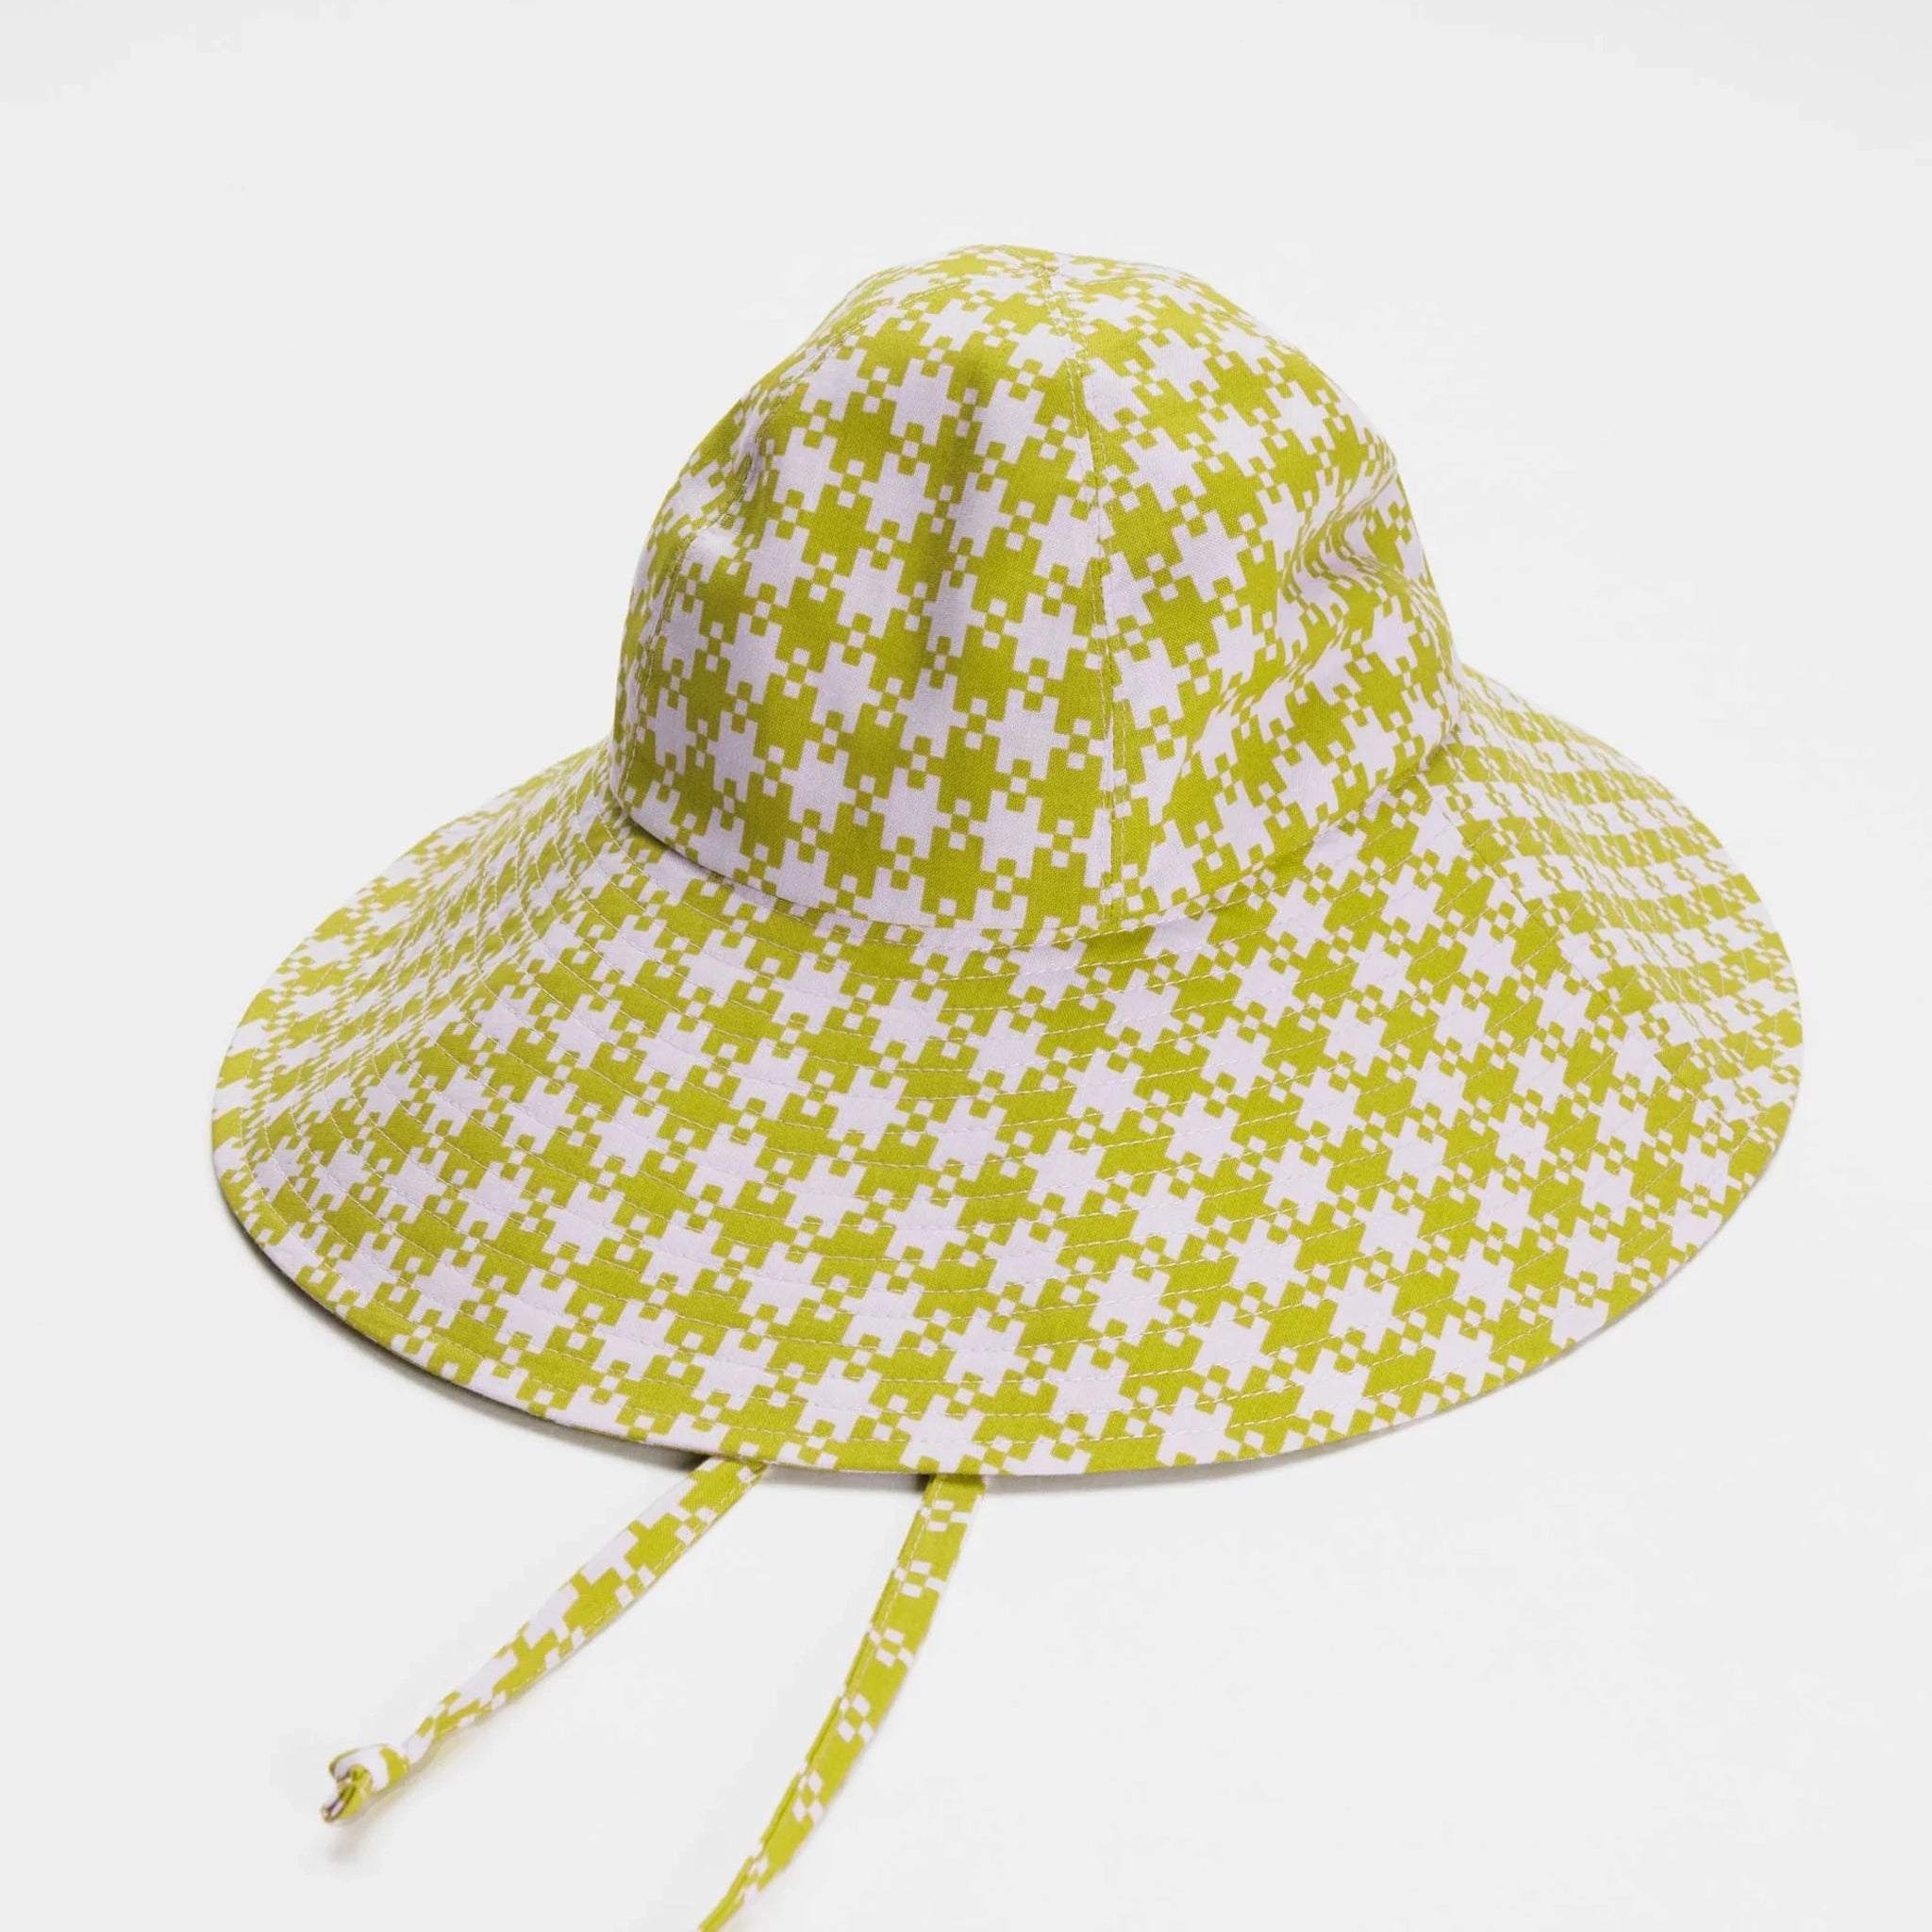 On a white background is a pink and green flexible sun hat with to straps for securing around the neck.